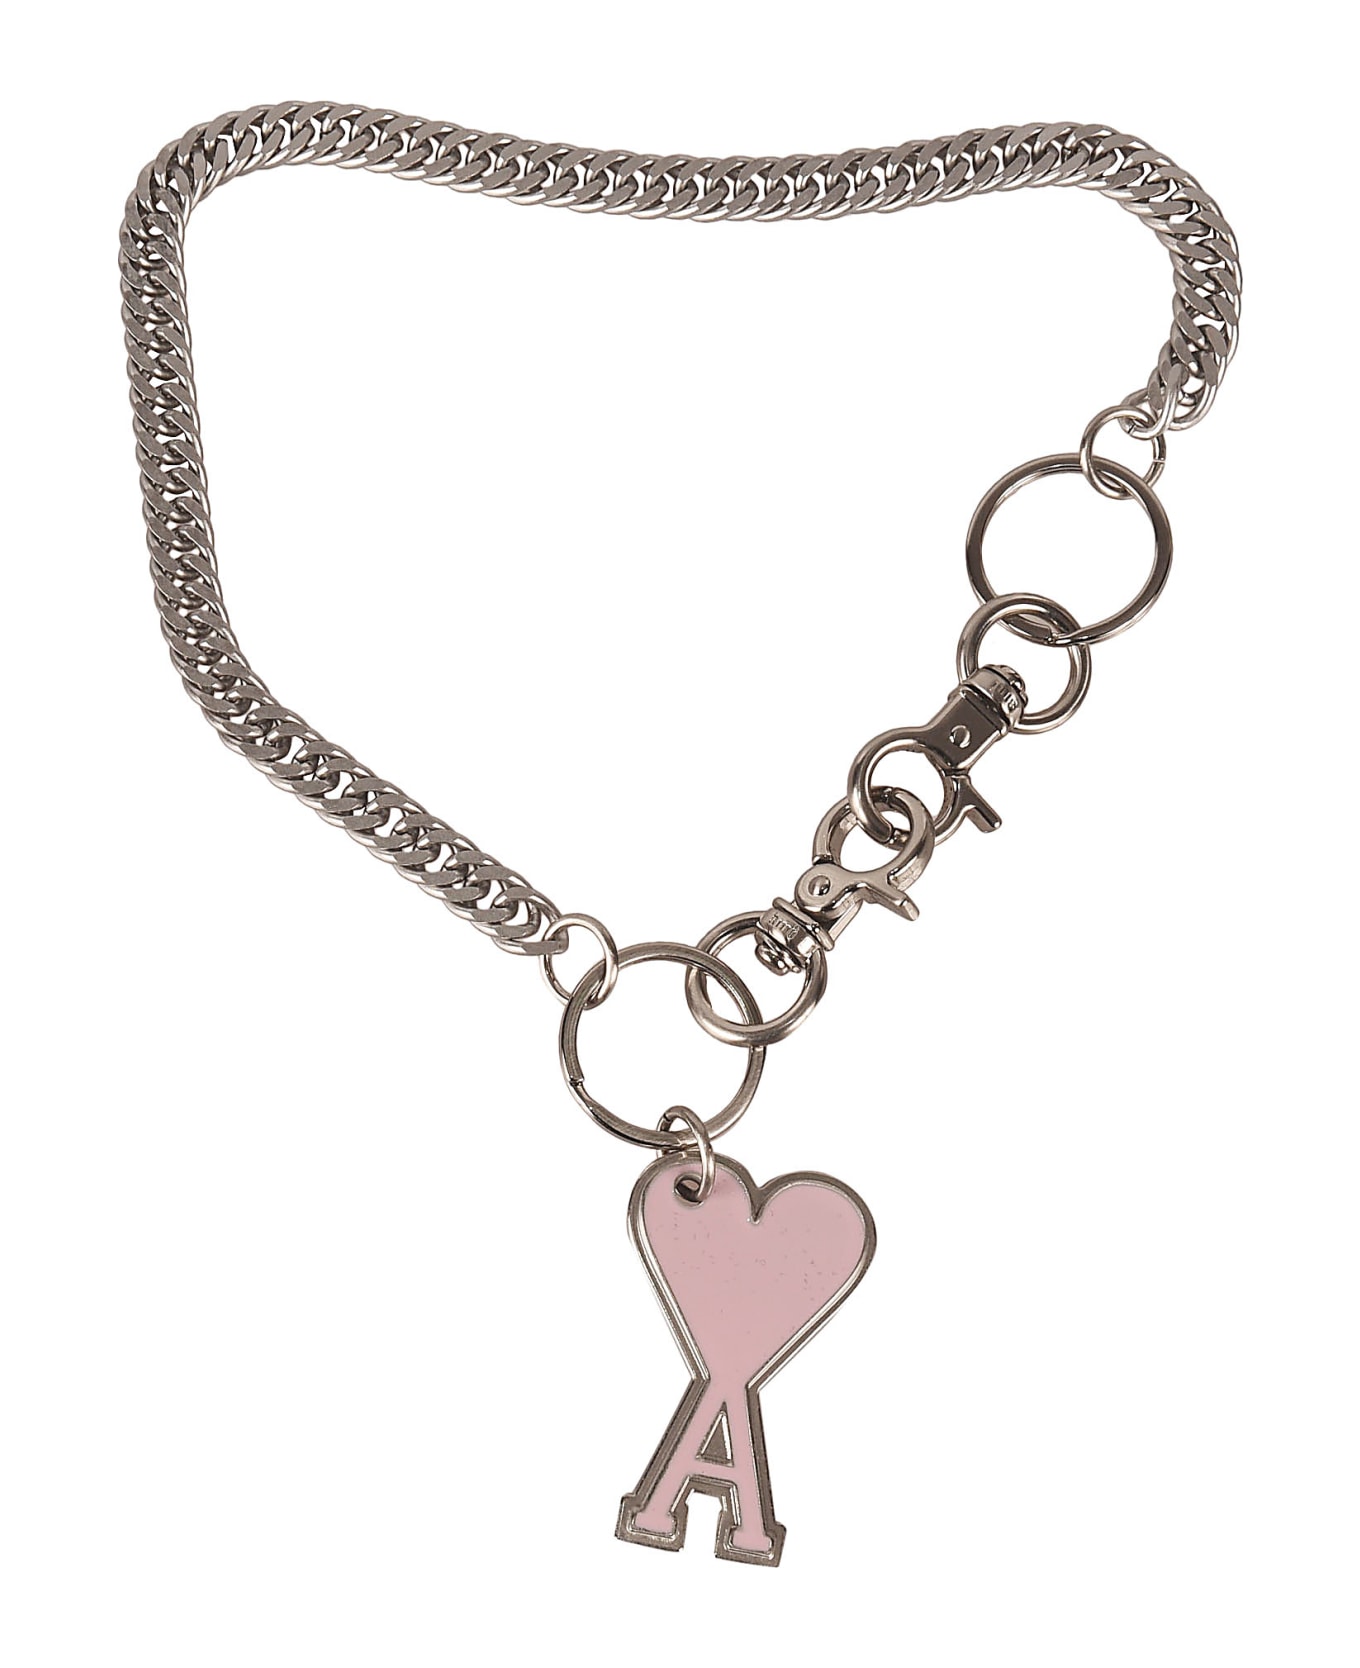 Ami Alexandre Mattiussi Logo Chain Necklace - Pale Pink ネックレス